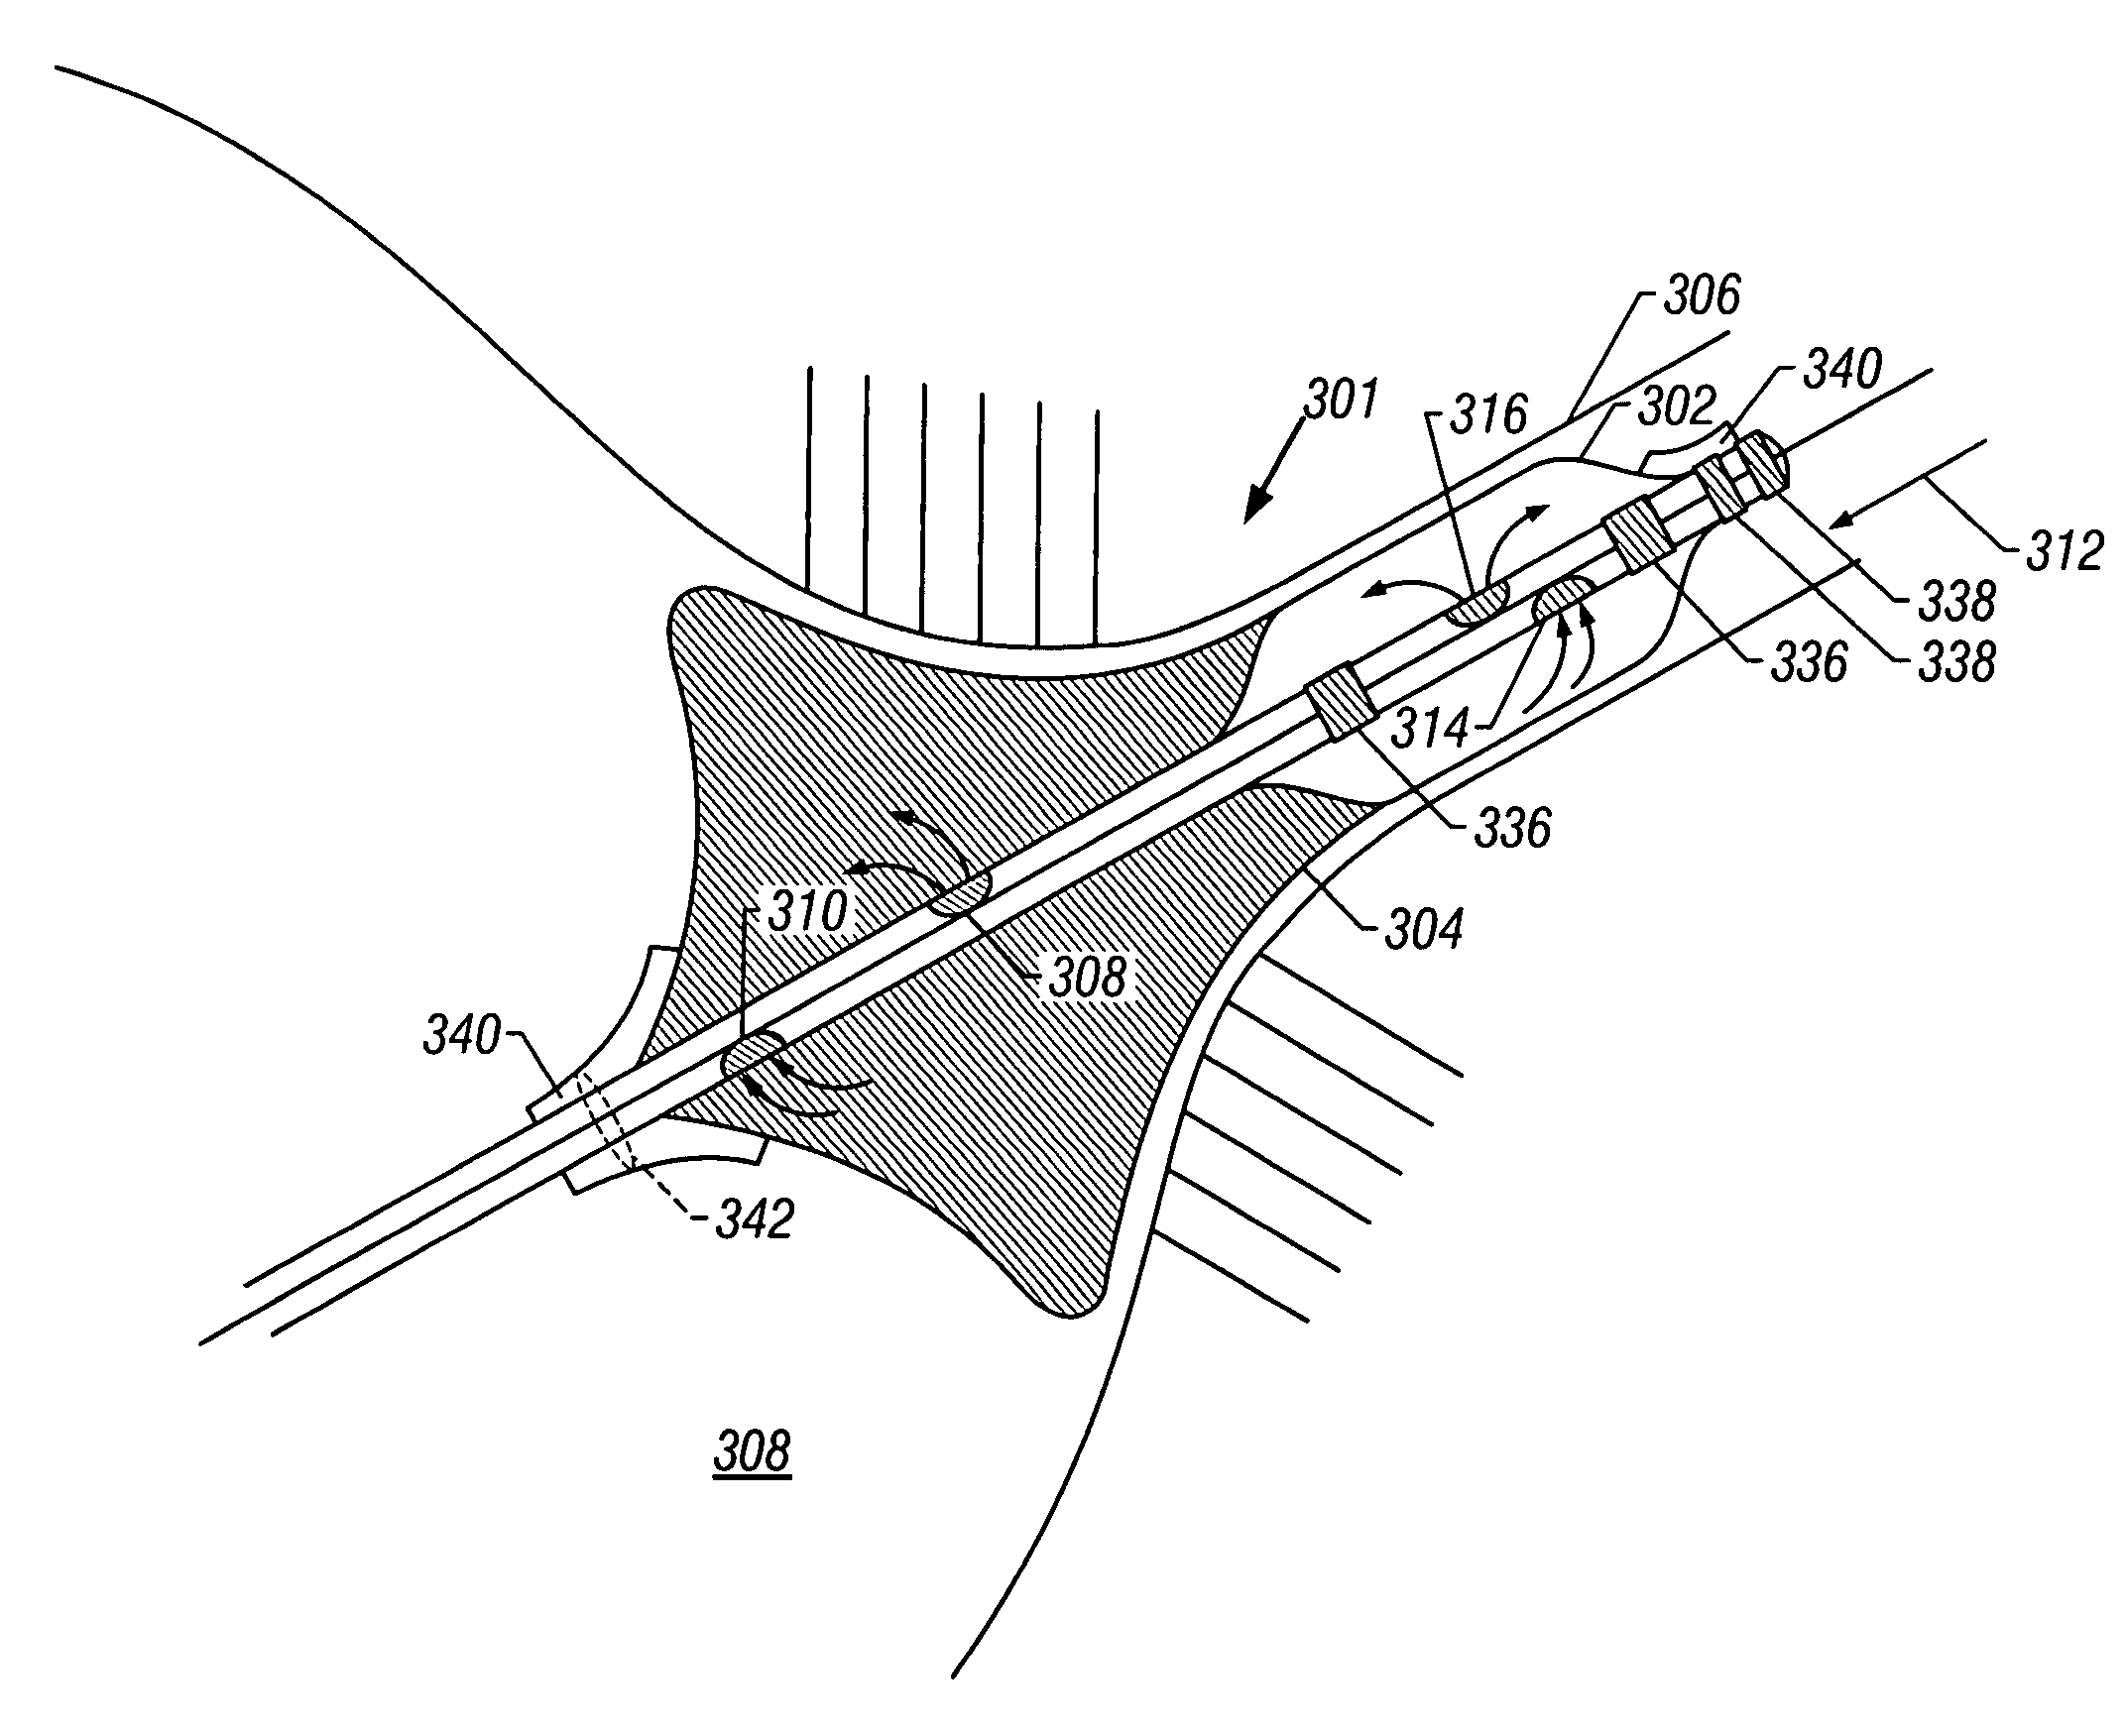 Method and device for performing cooling- or cryo-therapies for, e.g., angioplasty with reduced restenosis or pulmonary vein cell necrosis to inhibit atrial fibrillation employing microporous balloon